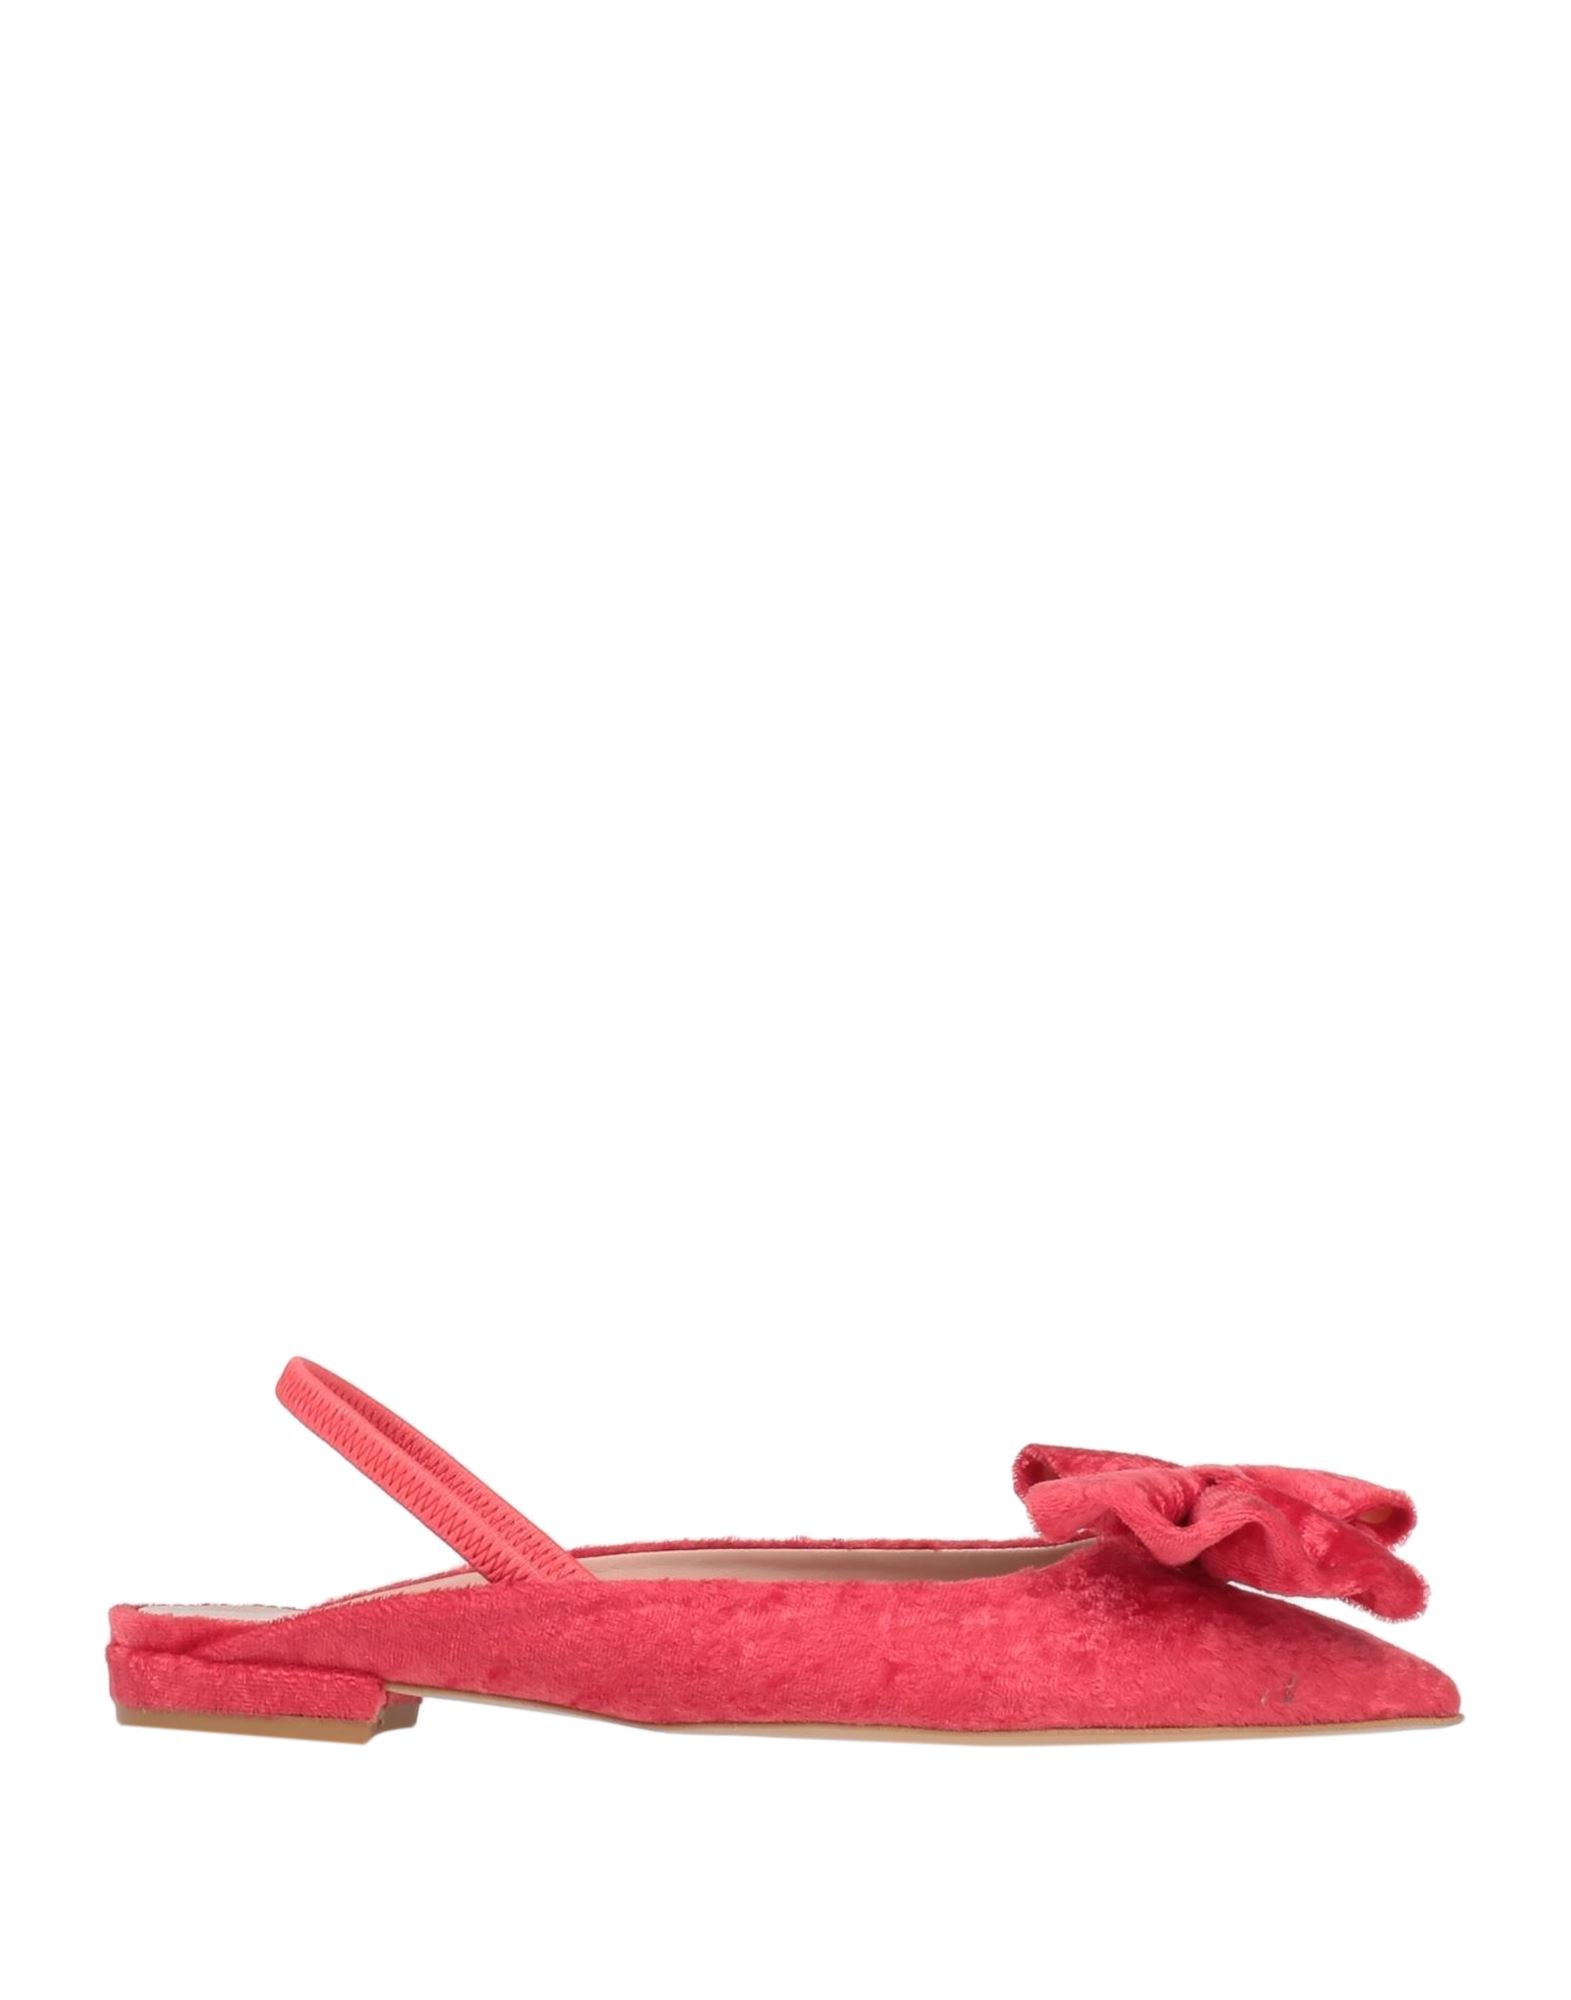 Islo Isabella Lorusso Ballet Flats In Tomato Red